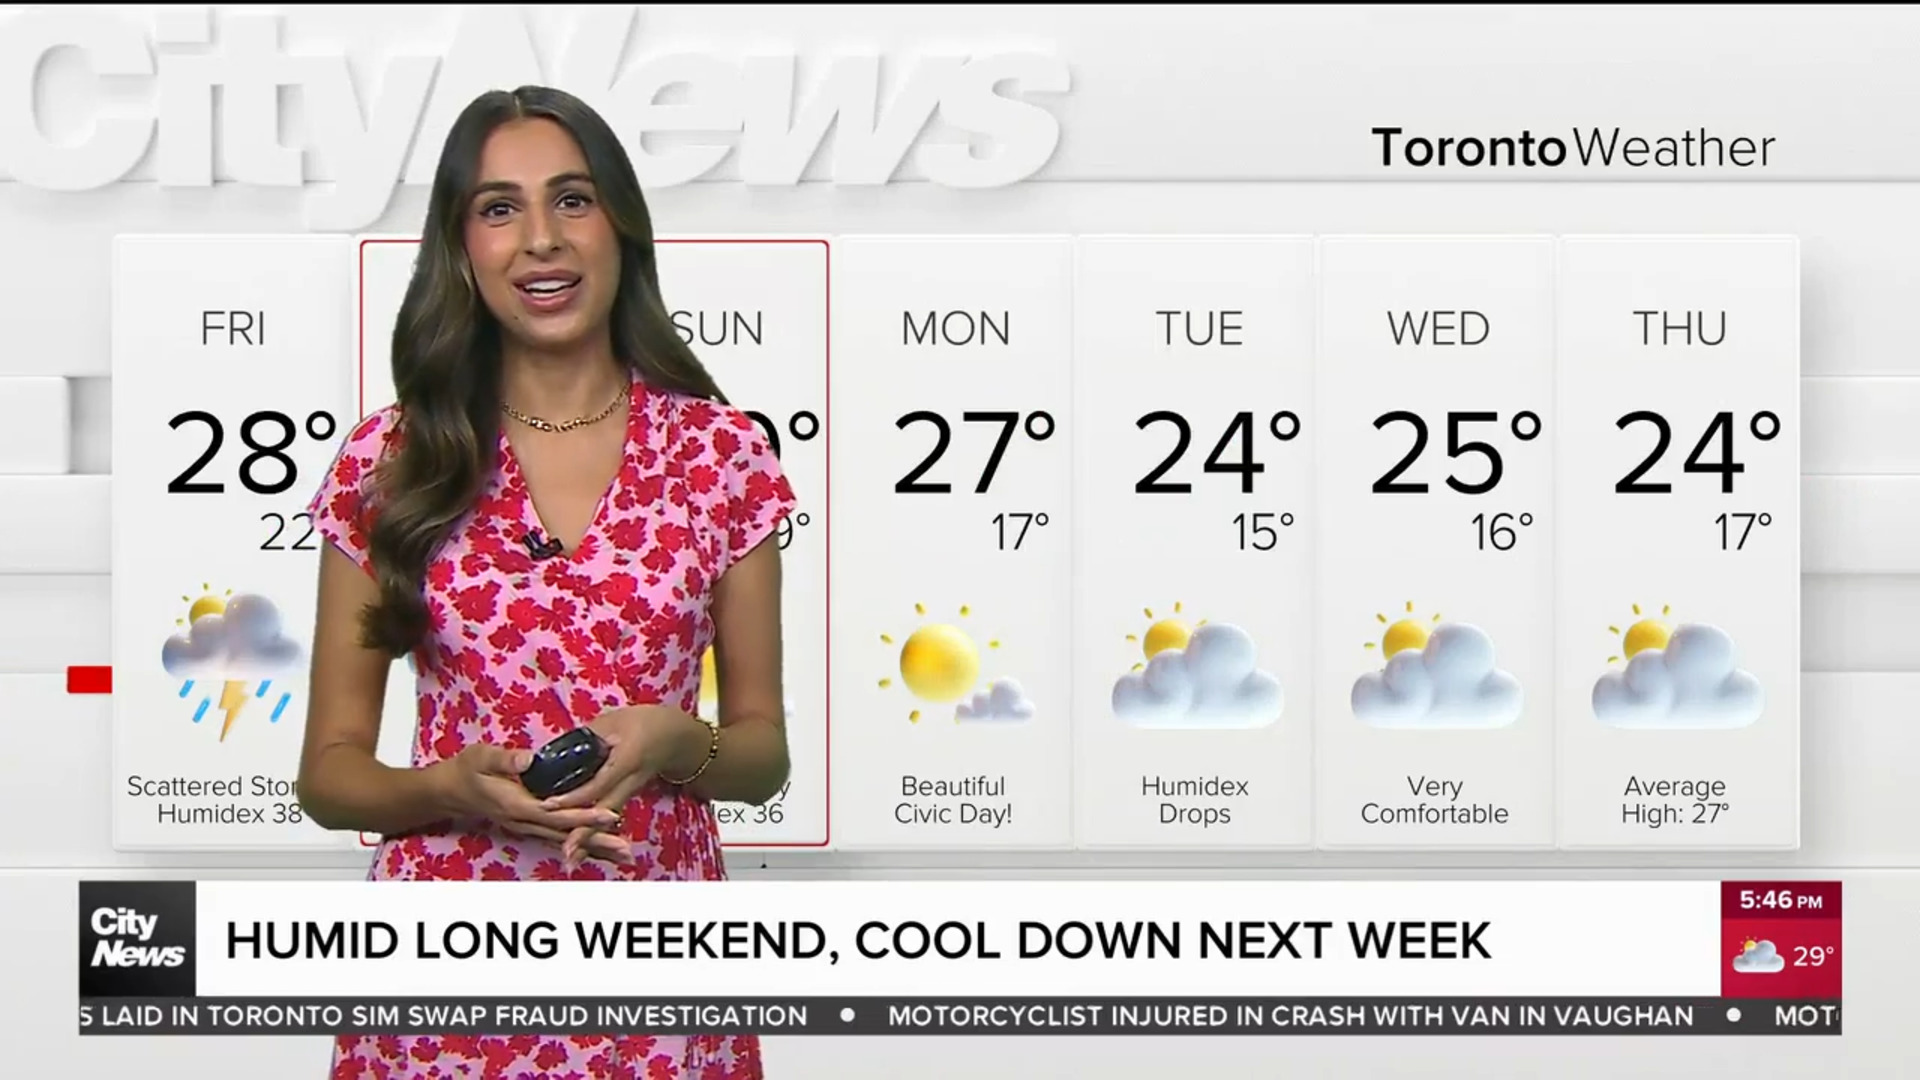 Remaining hot and humid through long weekend